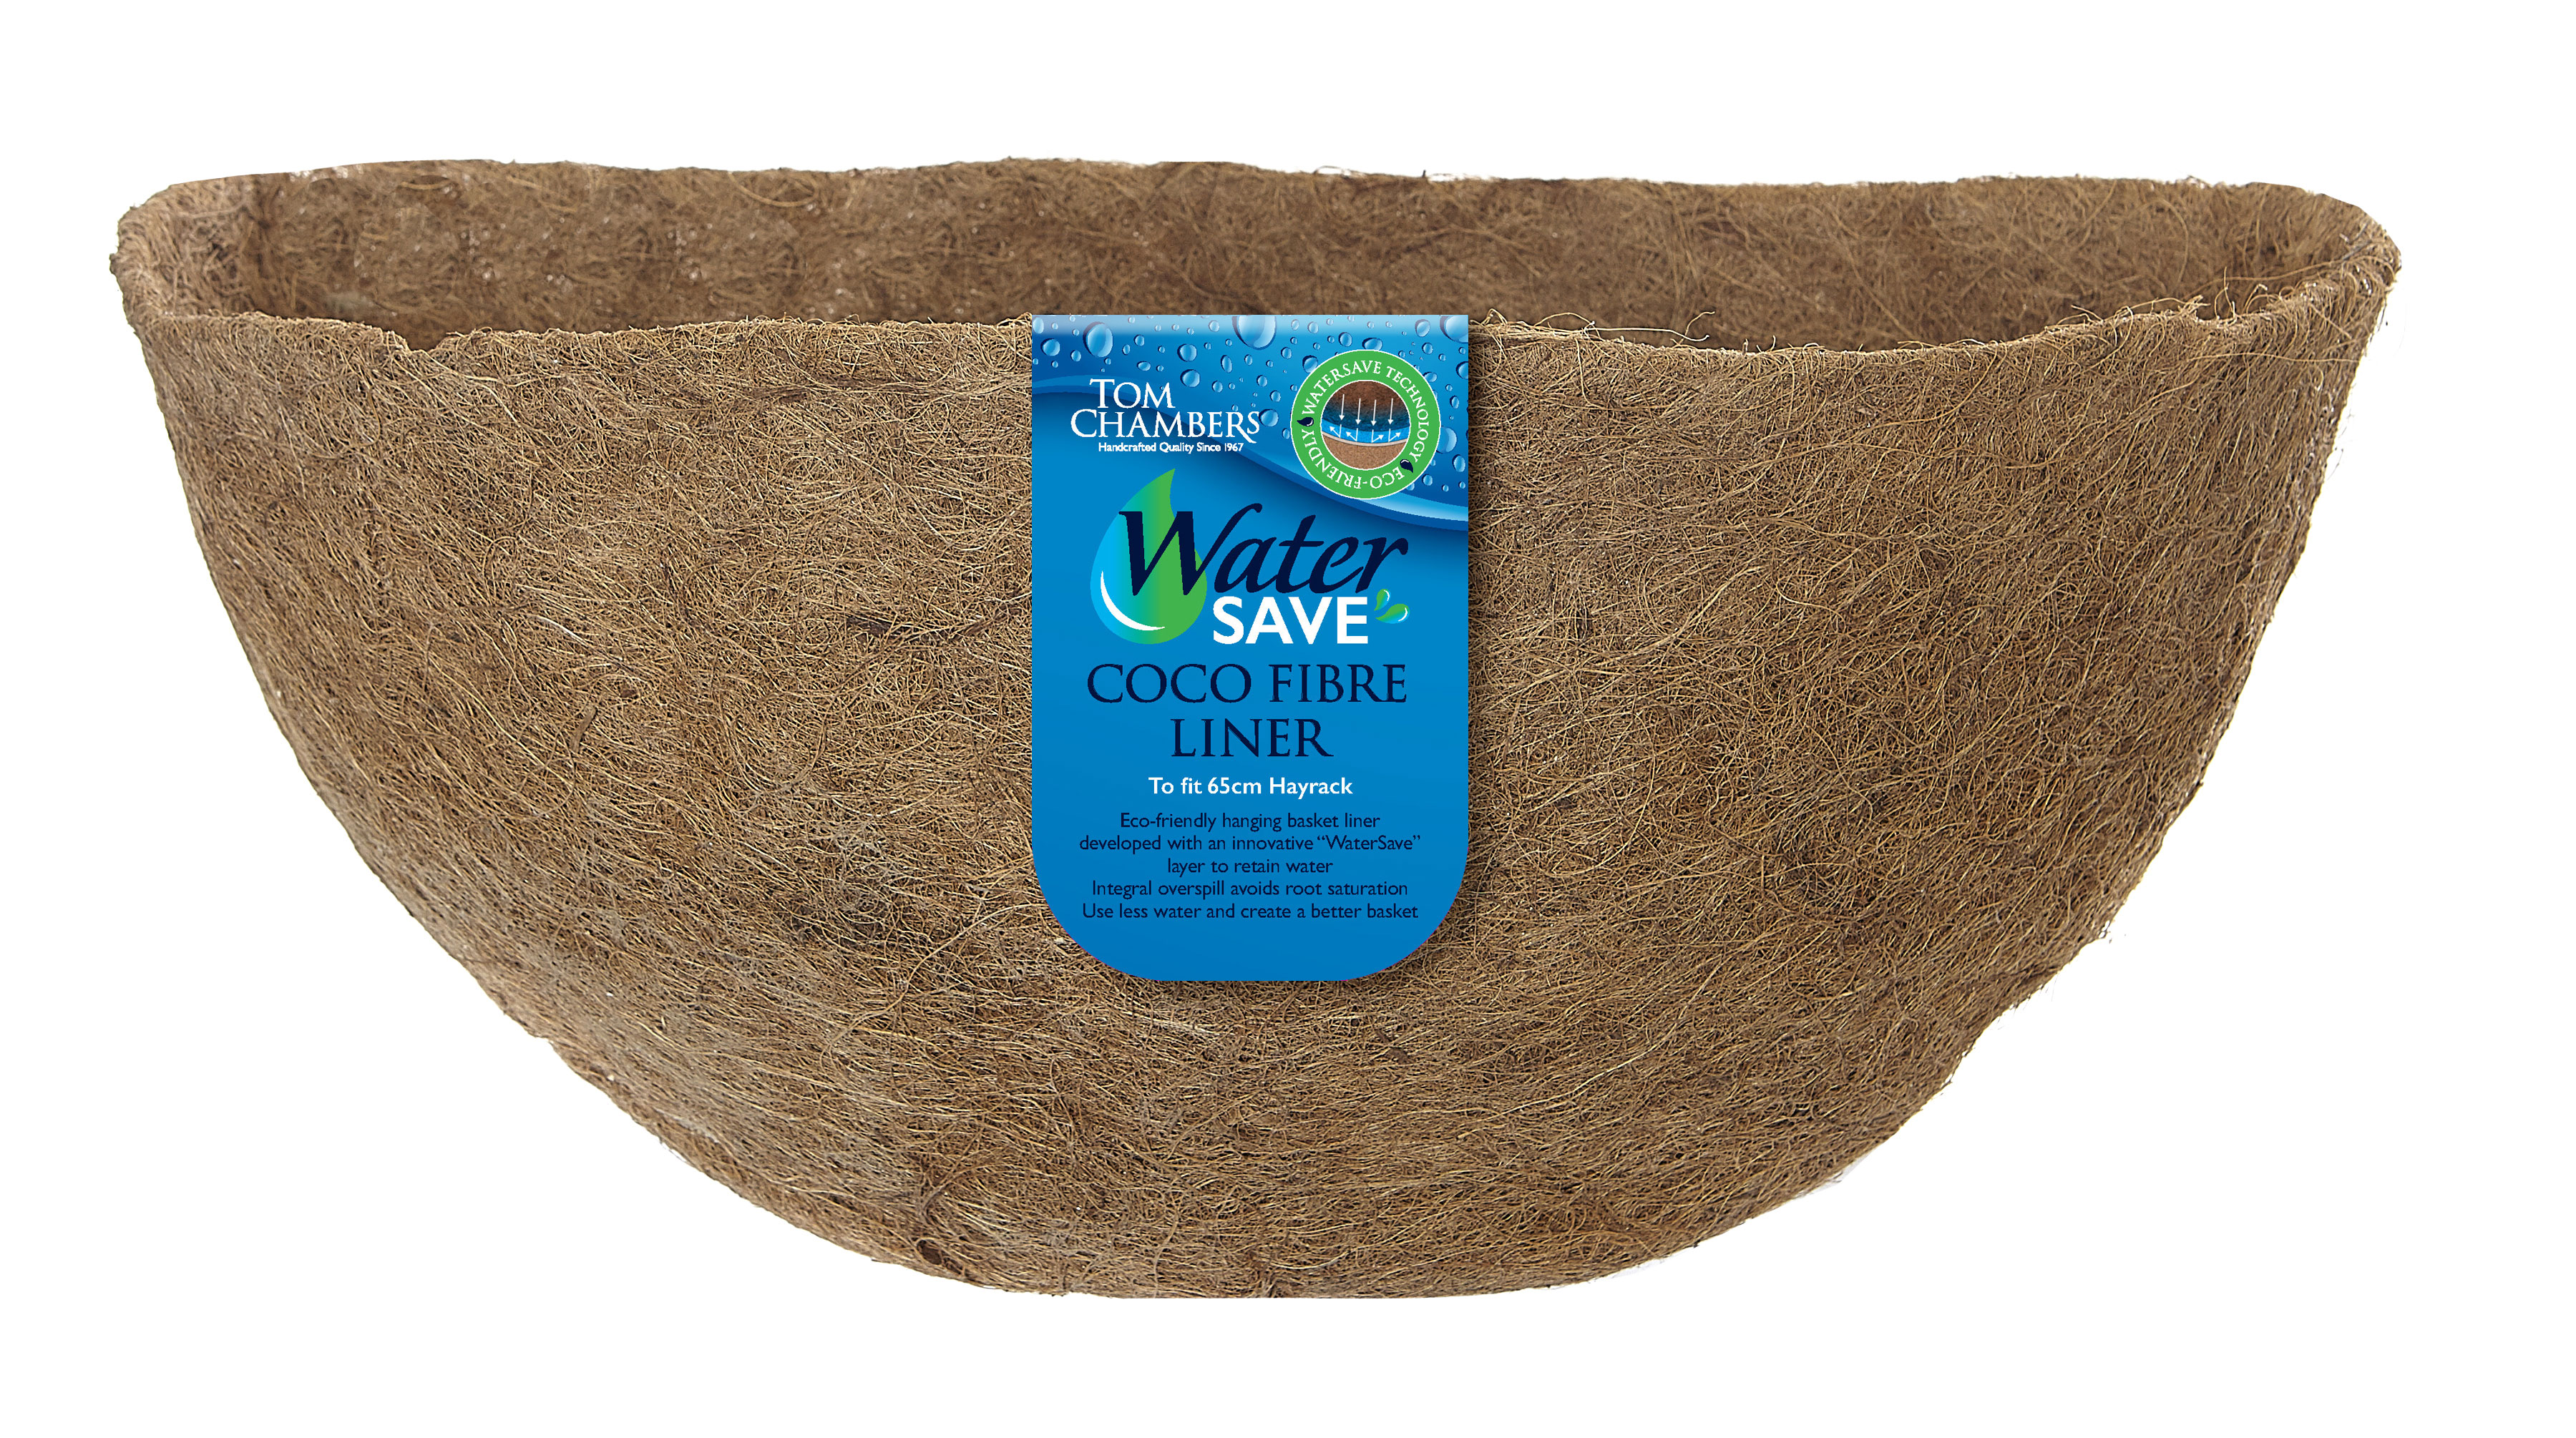 Coco Fibre Liner Water Save For 65cm Tom Chambers Hayrack